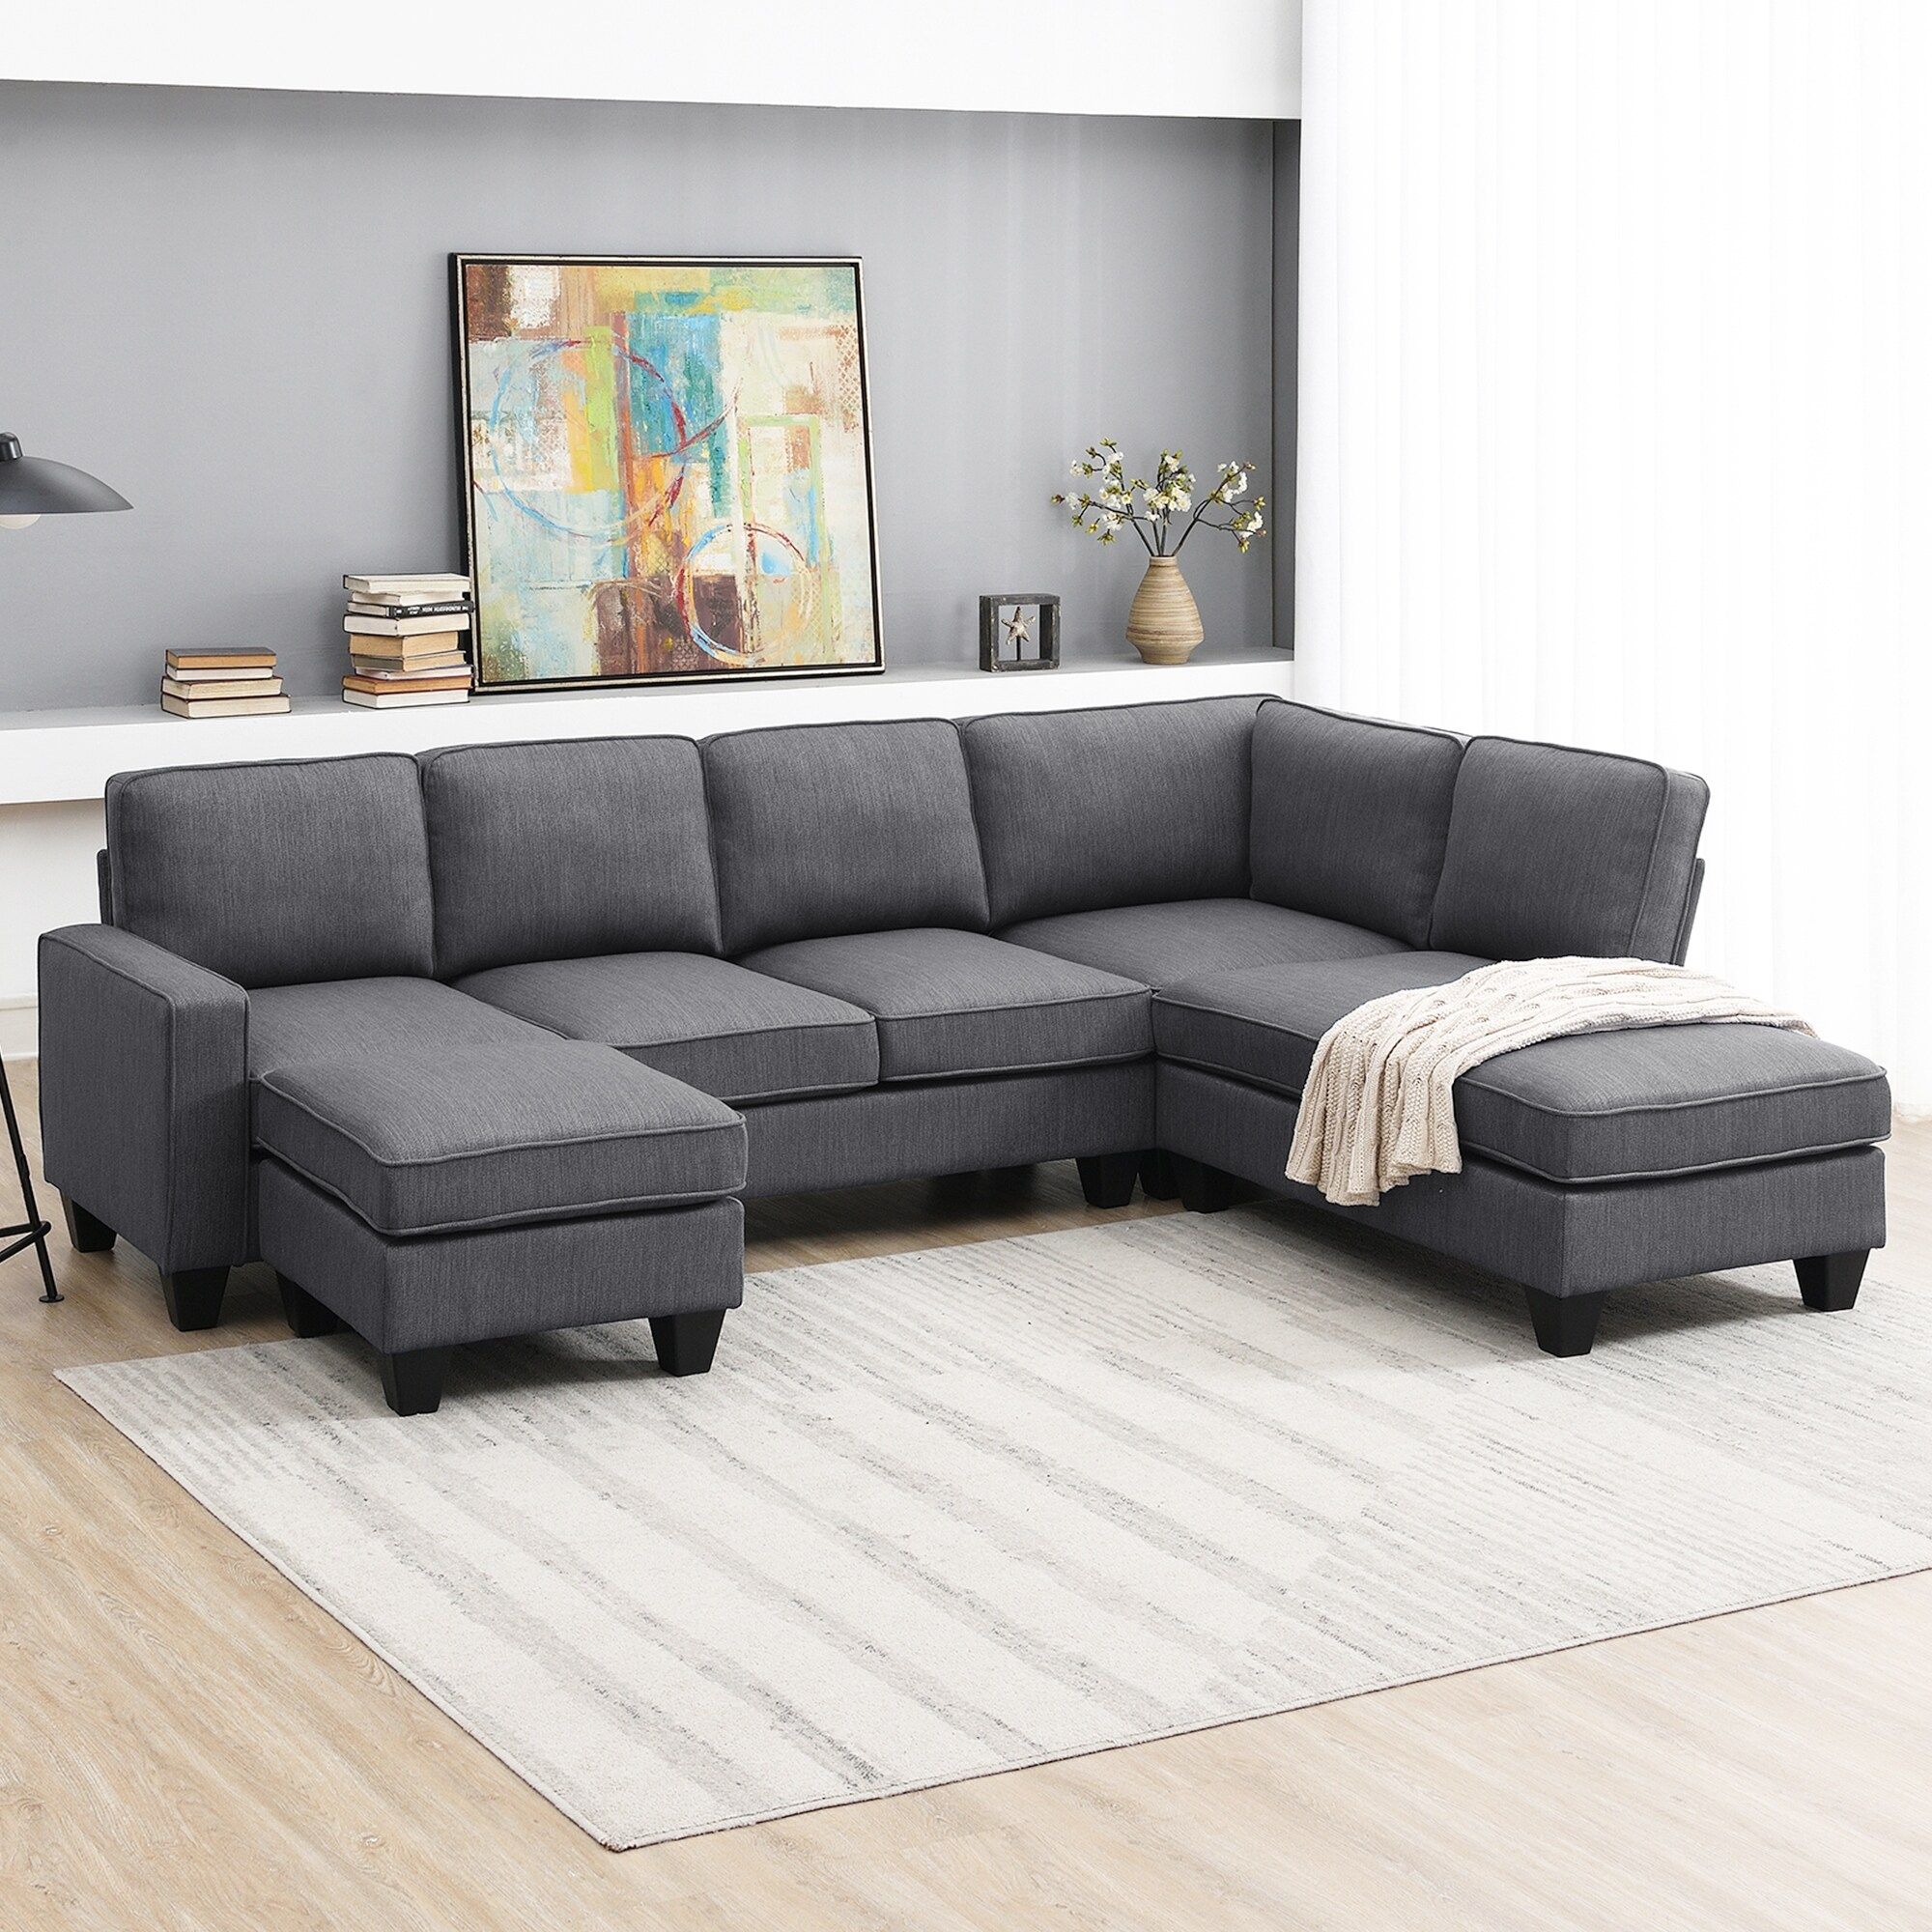 7 Seat Sectional Sofa Linen Fabric Couch Set With Ottoman, Dark Grey – Bed  Bath & Beyond – 39014491 Within Light Charcoal Linen Sofas (View 15 of 15)